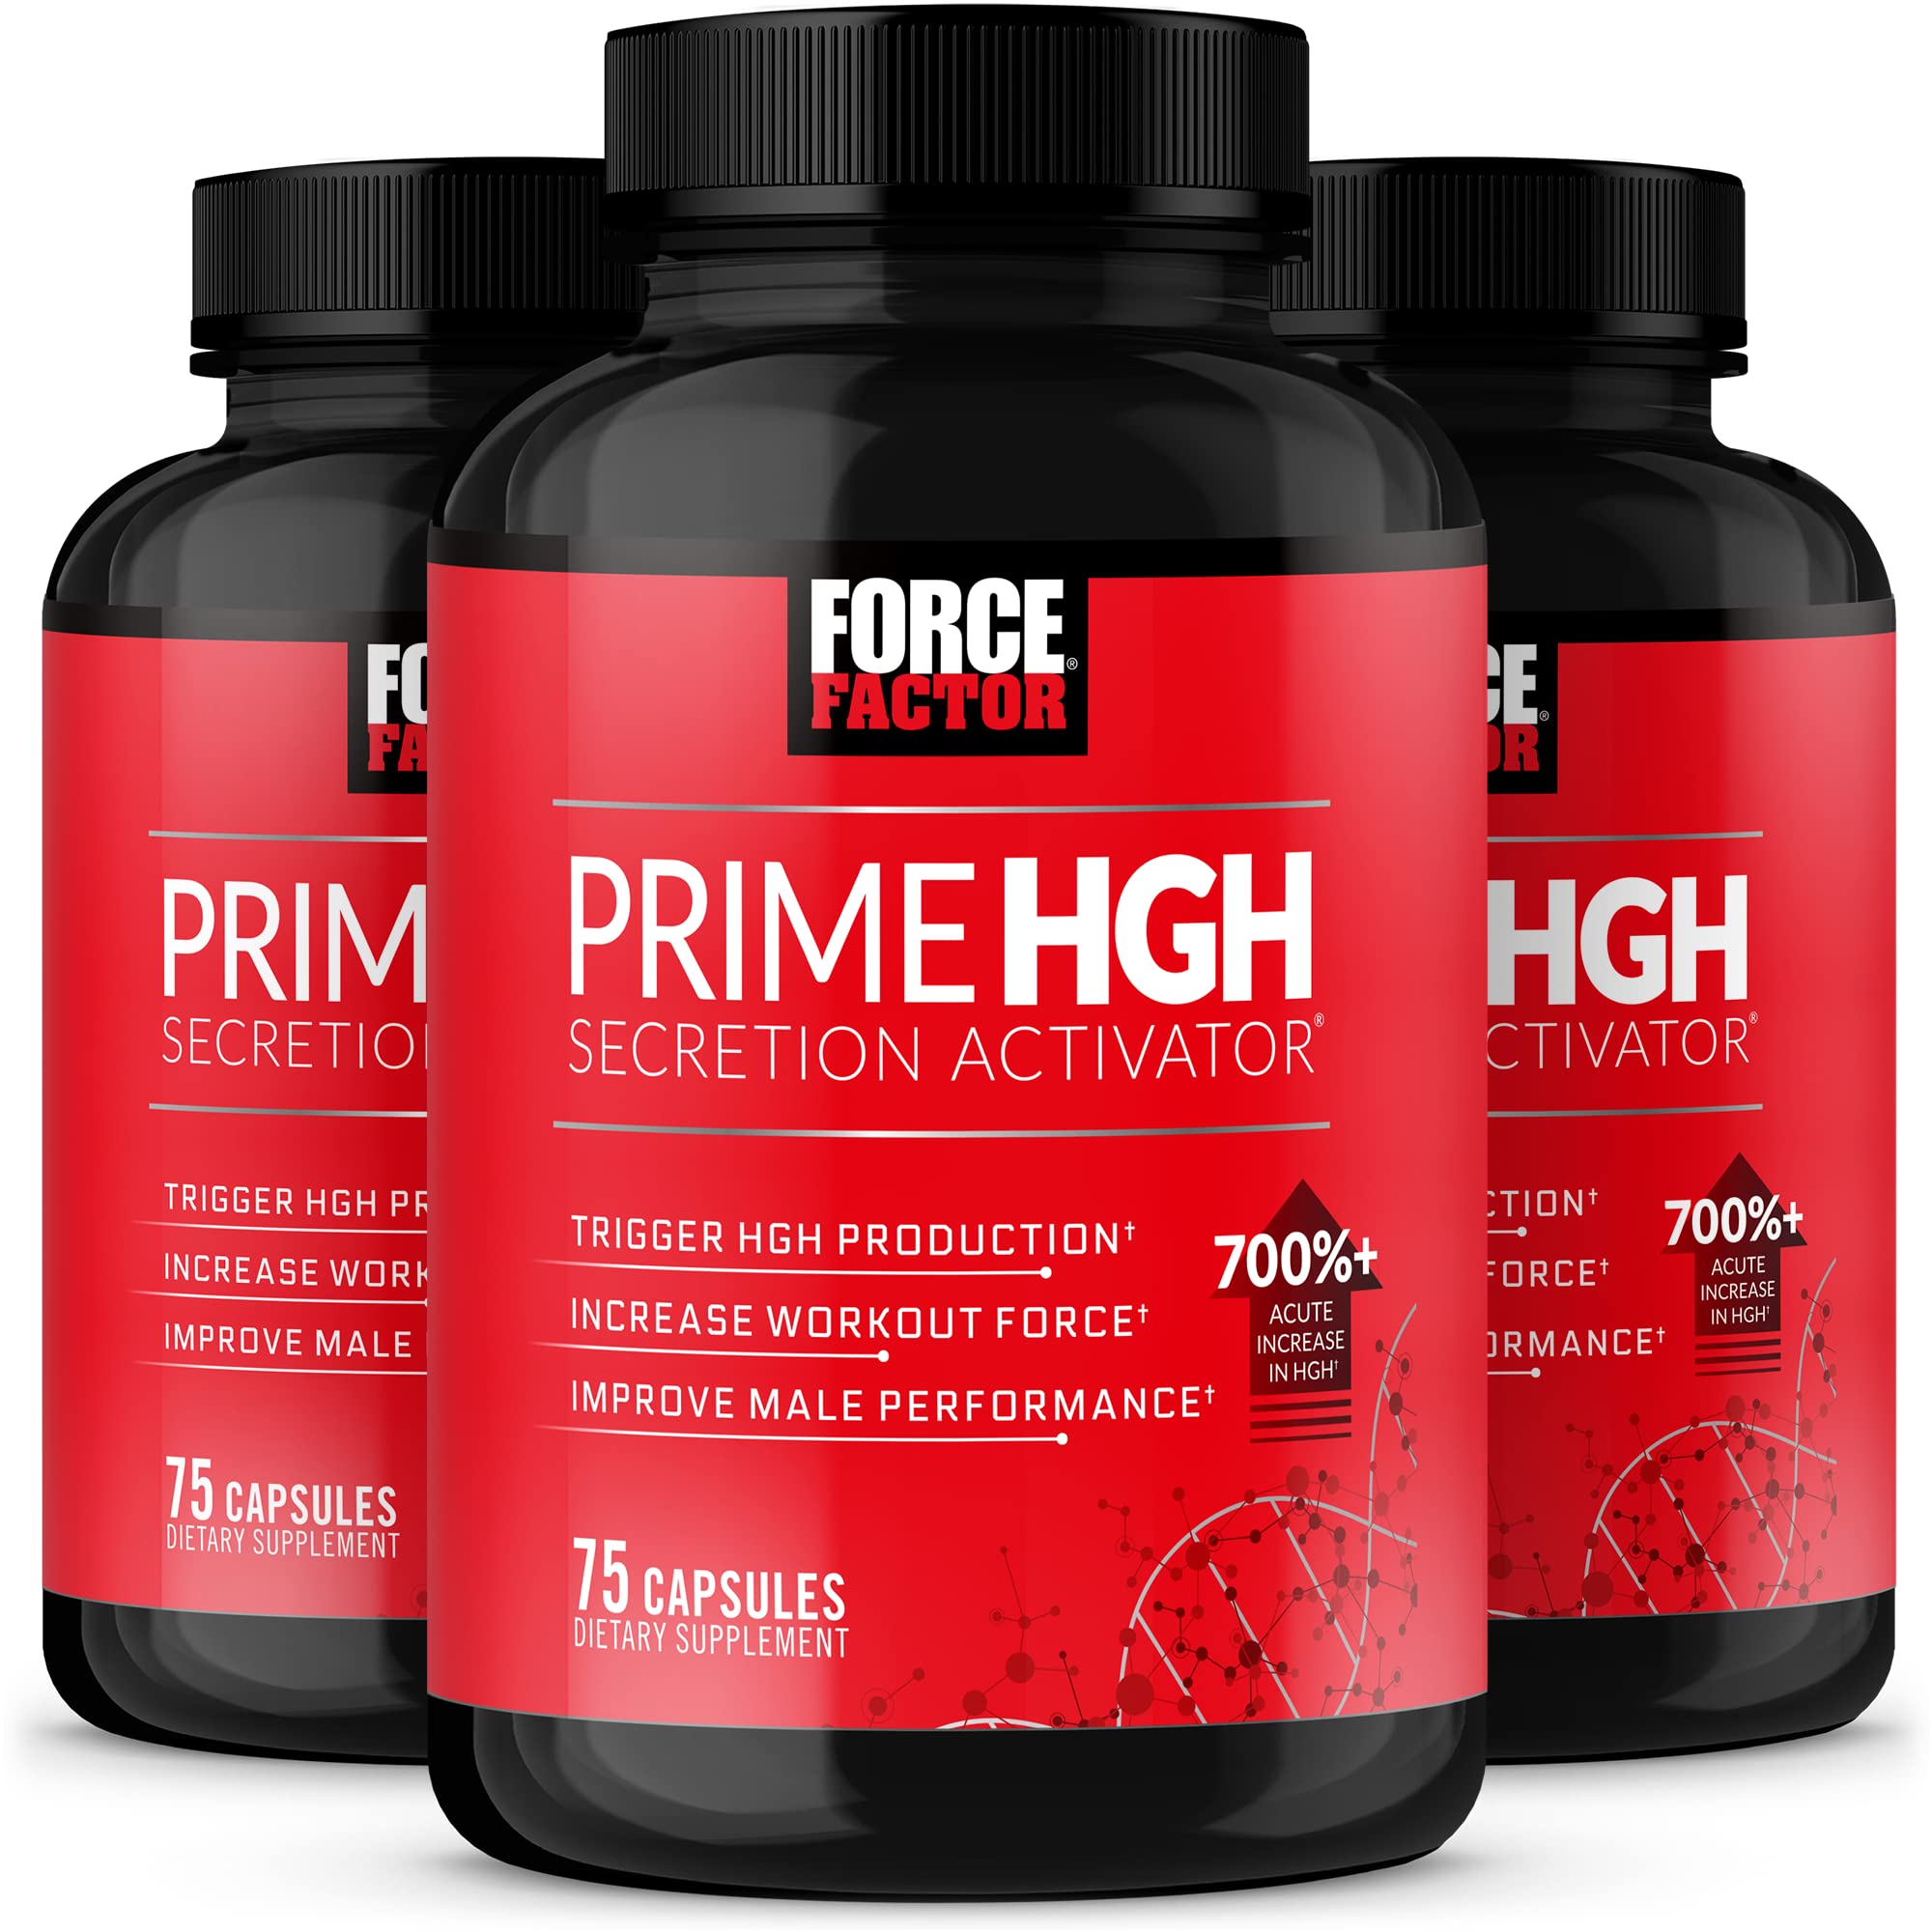 Force Factor Prime HGH Secretion Activator, 3-Pack, HGH Supplement for Men with Clinically Studied AlphaSize to Help Trigger HGH Production, Increase Workout Force, & Improve Performance, 225 Count